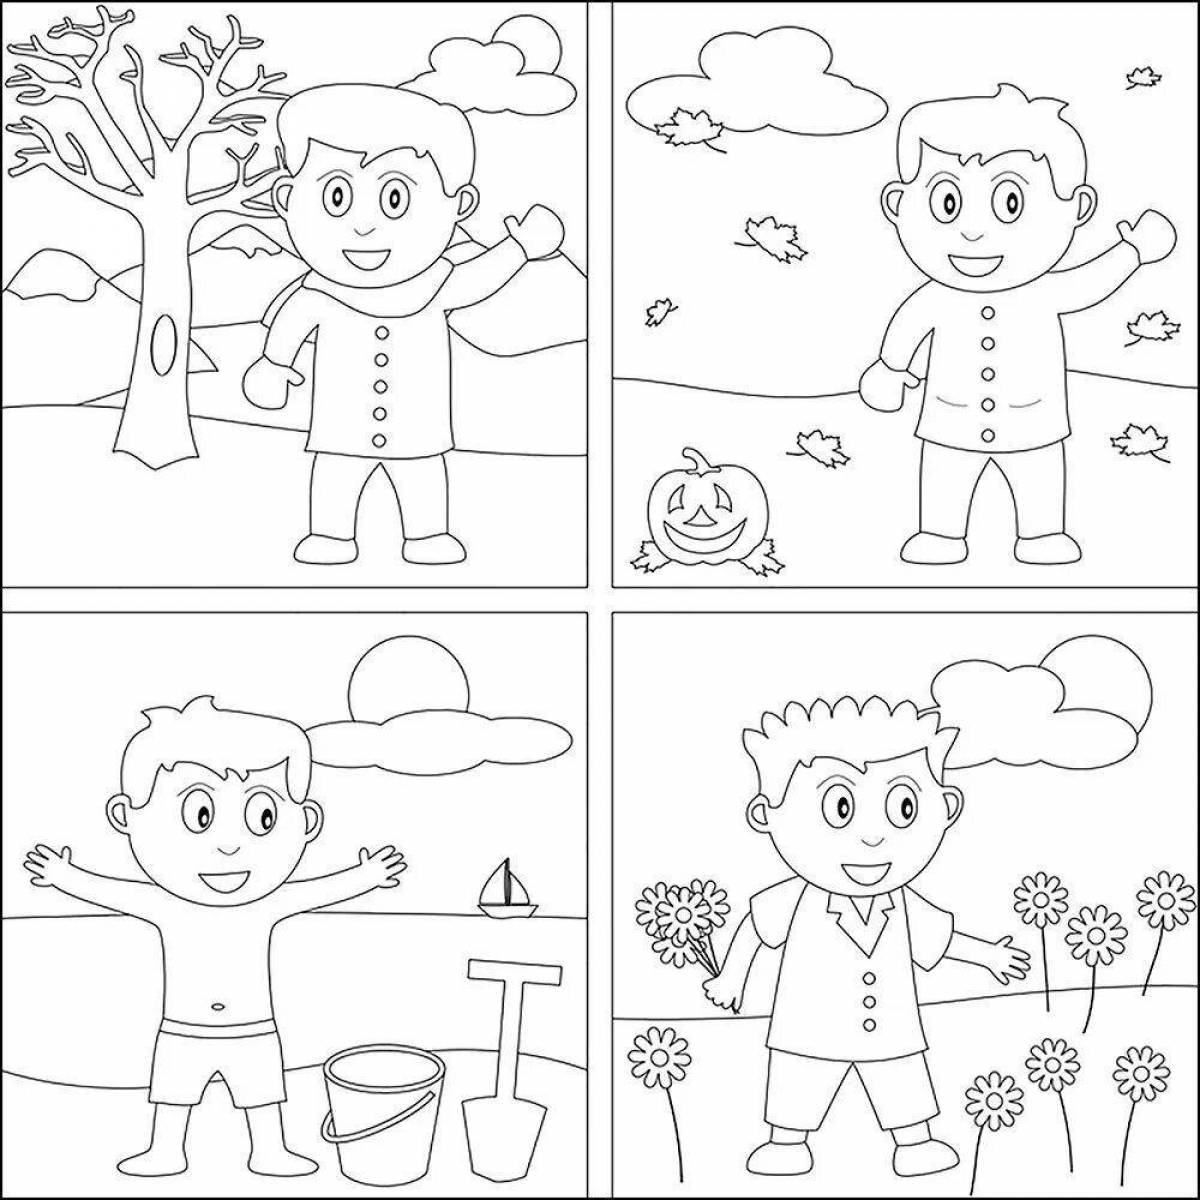 Fantastic coloring pages for children 3-4 years old seasons